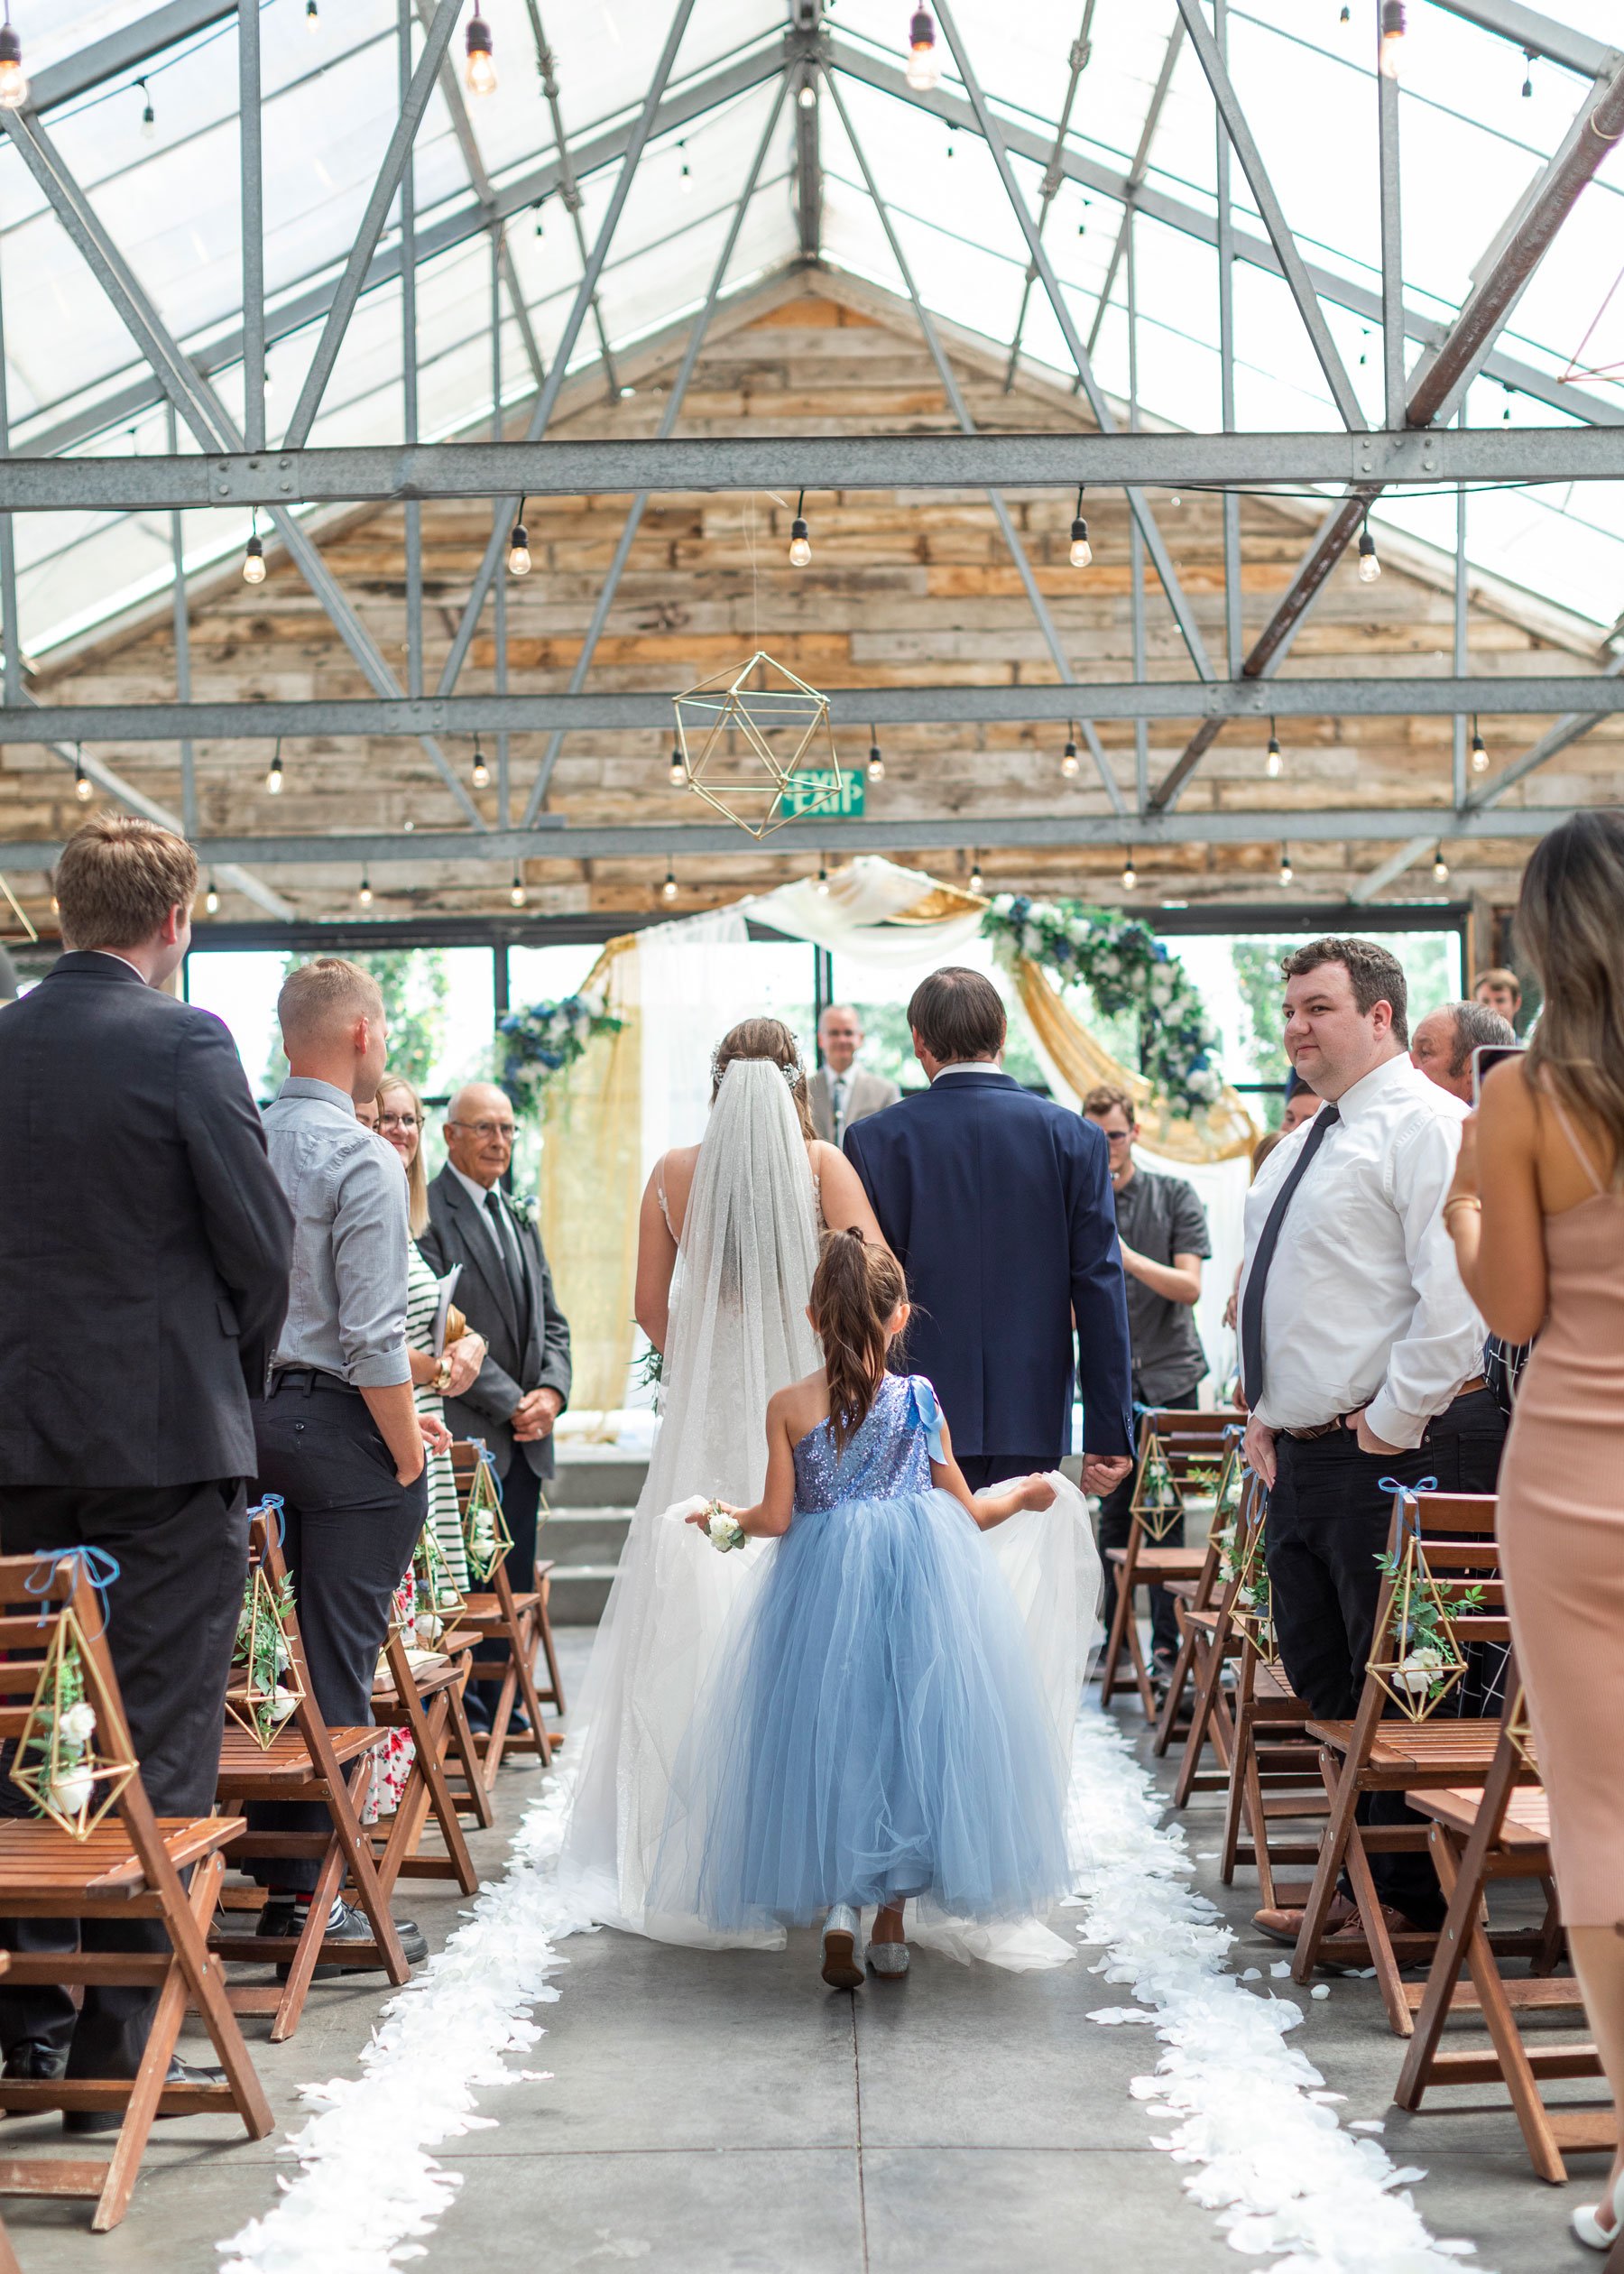  A professional wedding photographer Savanna Richardson Photography captures a darling picture of the bride walking down the aisle with a girl holding her wedding train behind her. Holding the wedding dress little girl walks down the aisle here comes